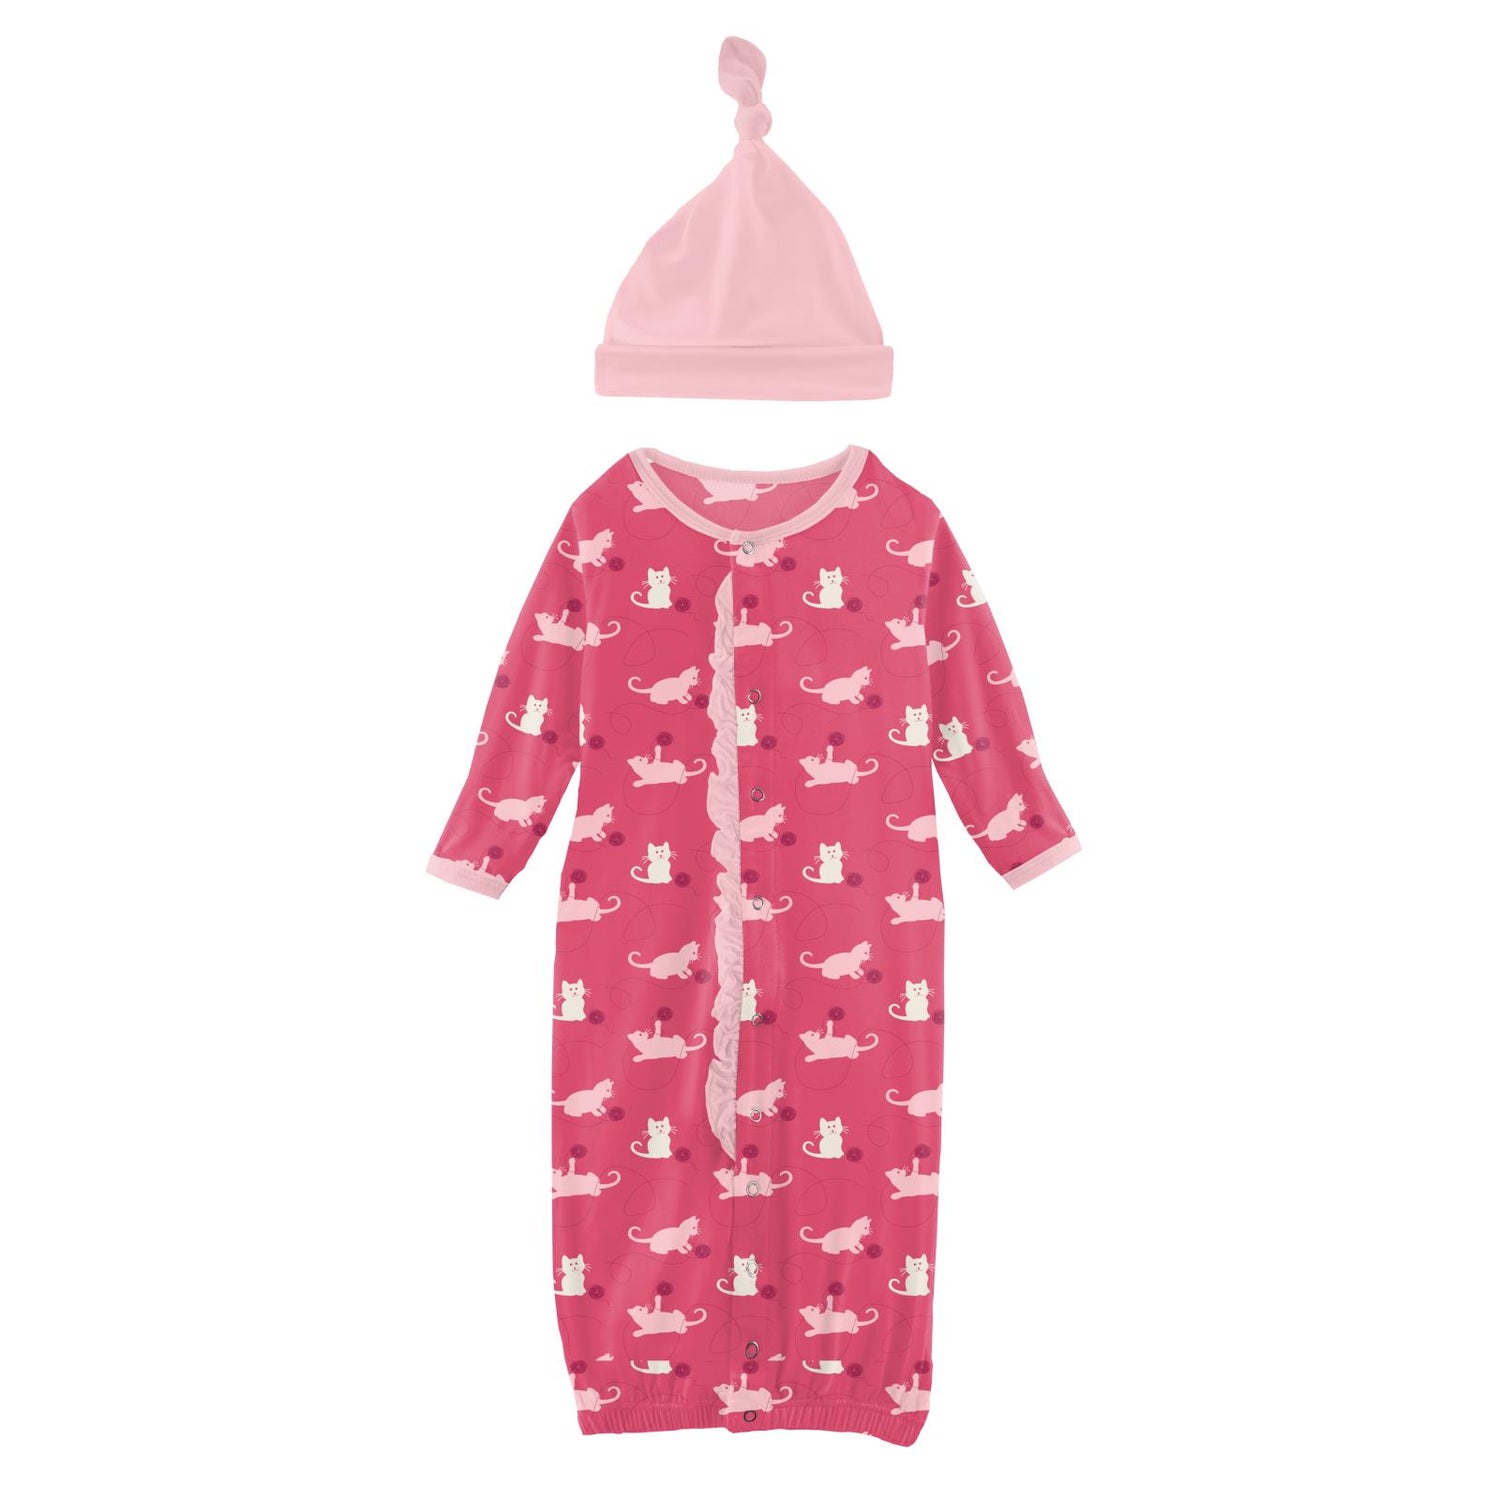 Print Ruffle Layette Gown Converter & Single Knot Hat Set in Winter Rose Kitty